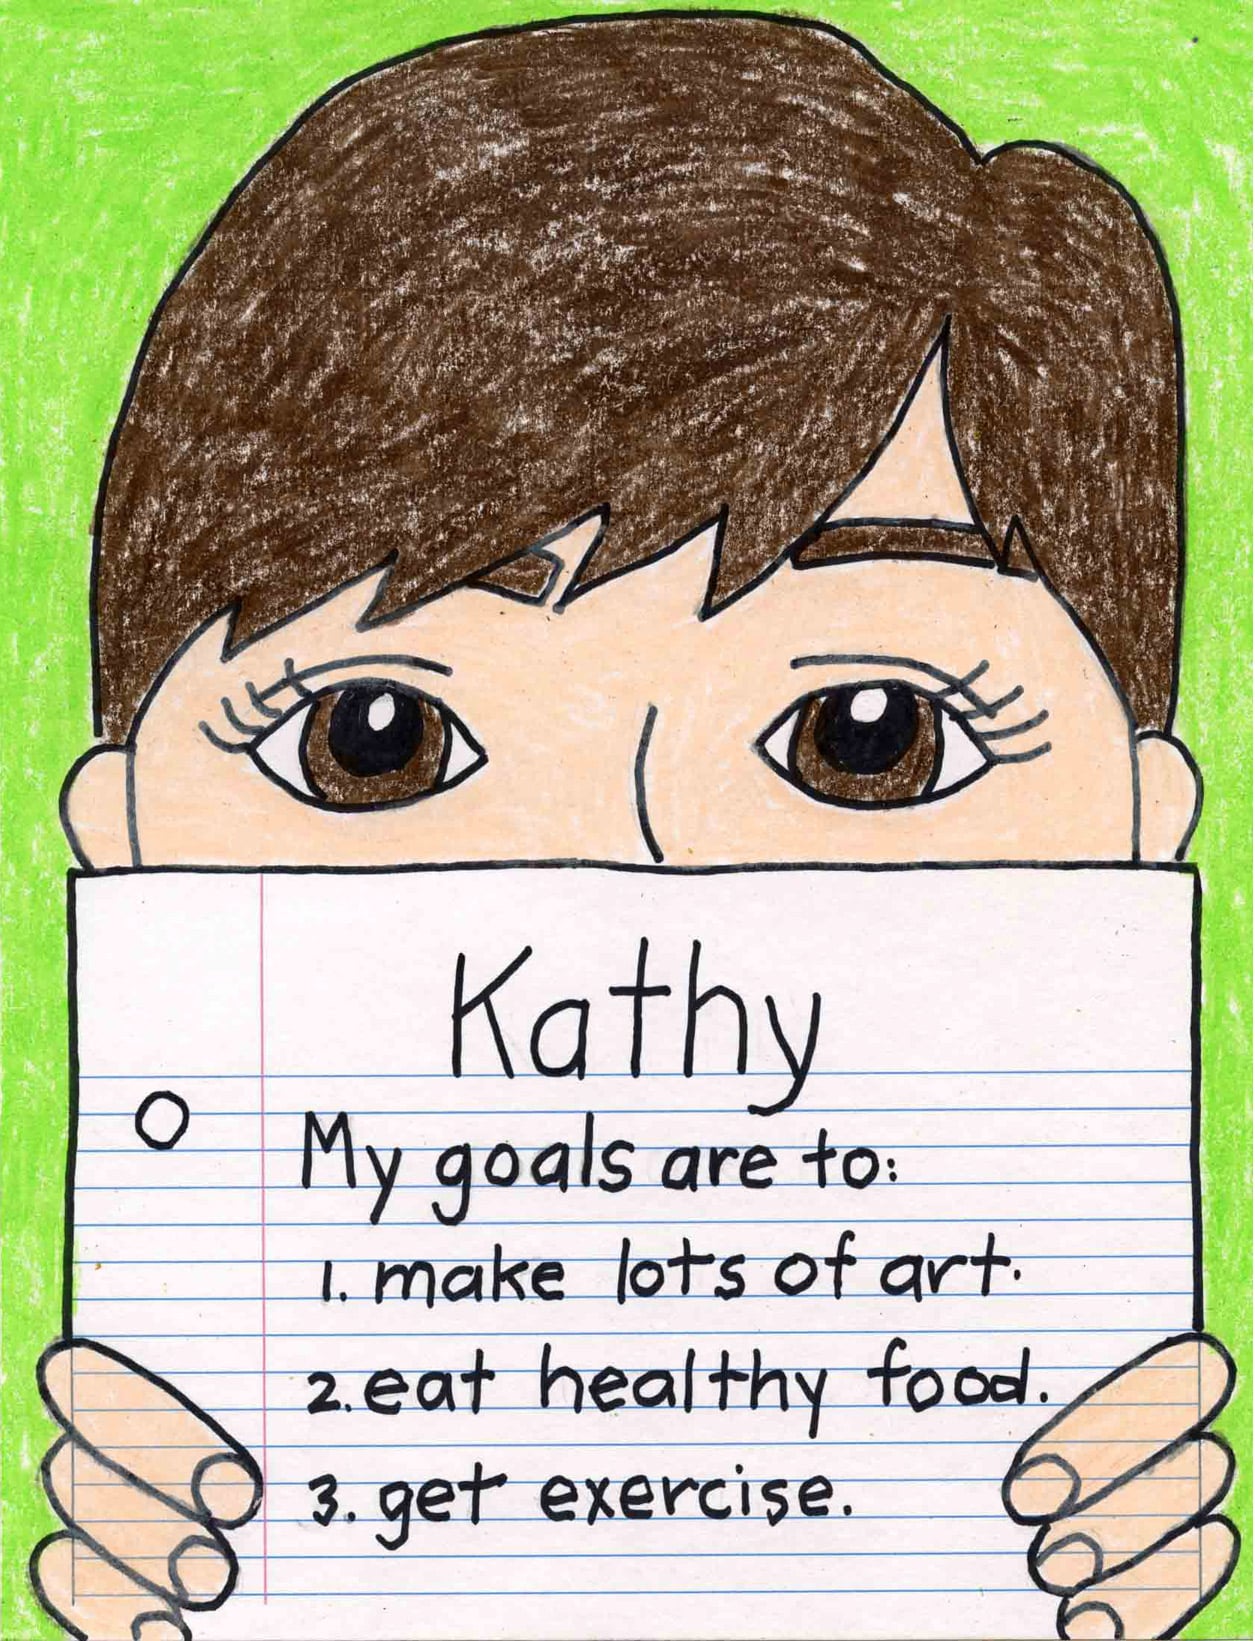 My Goals Self Portrait Template: Back to School Goal Setting Project for Elementary